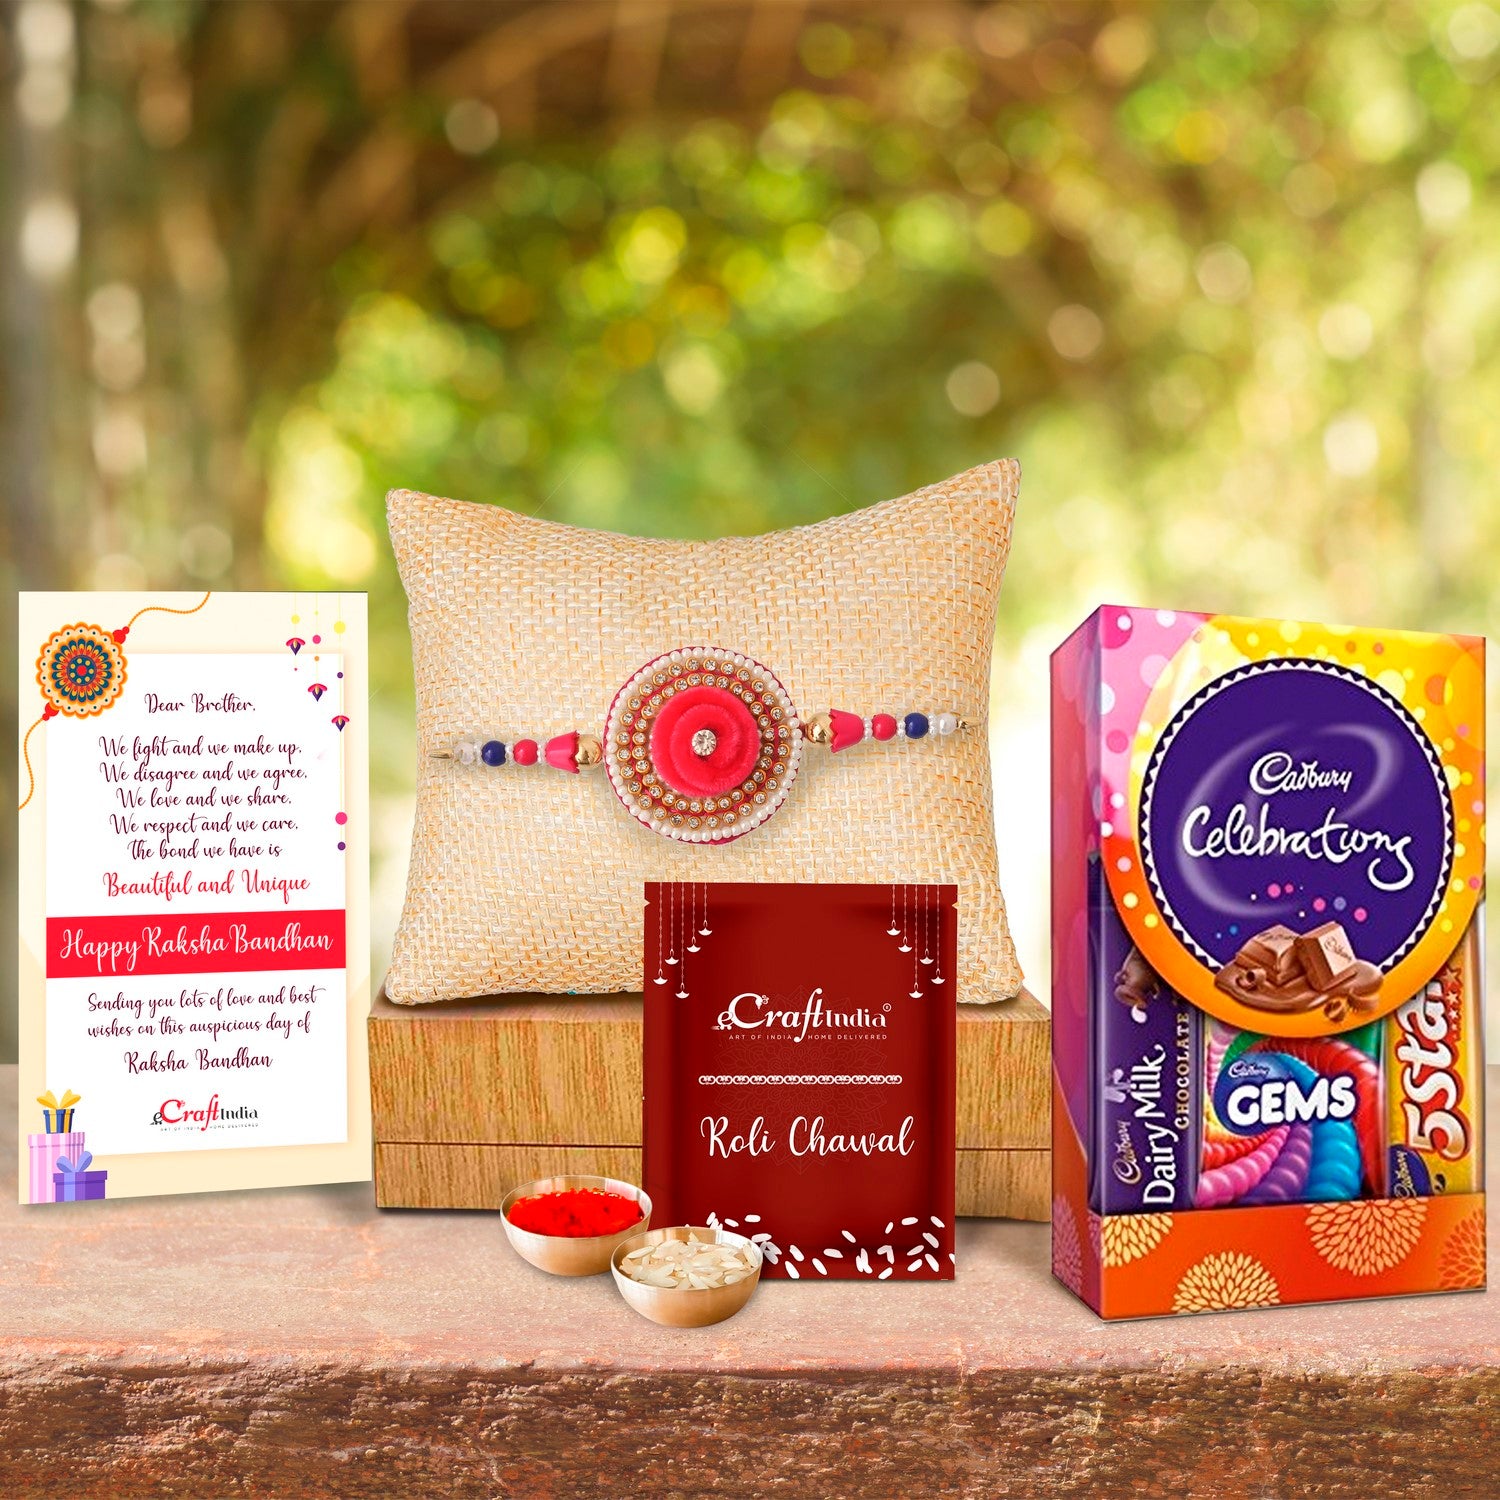 Designer Rakhi with Cadbury Celebrations Gift Pack of 5 Assorted Chocolates and Roli Chawal Pack, Best Wishes Greeting Card